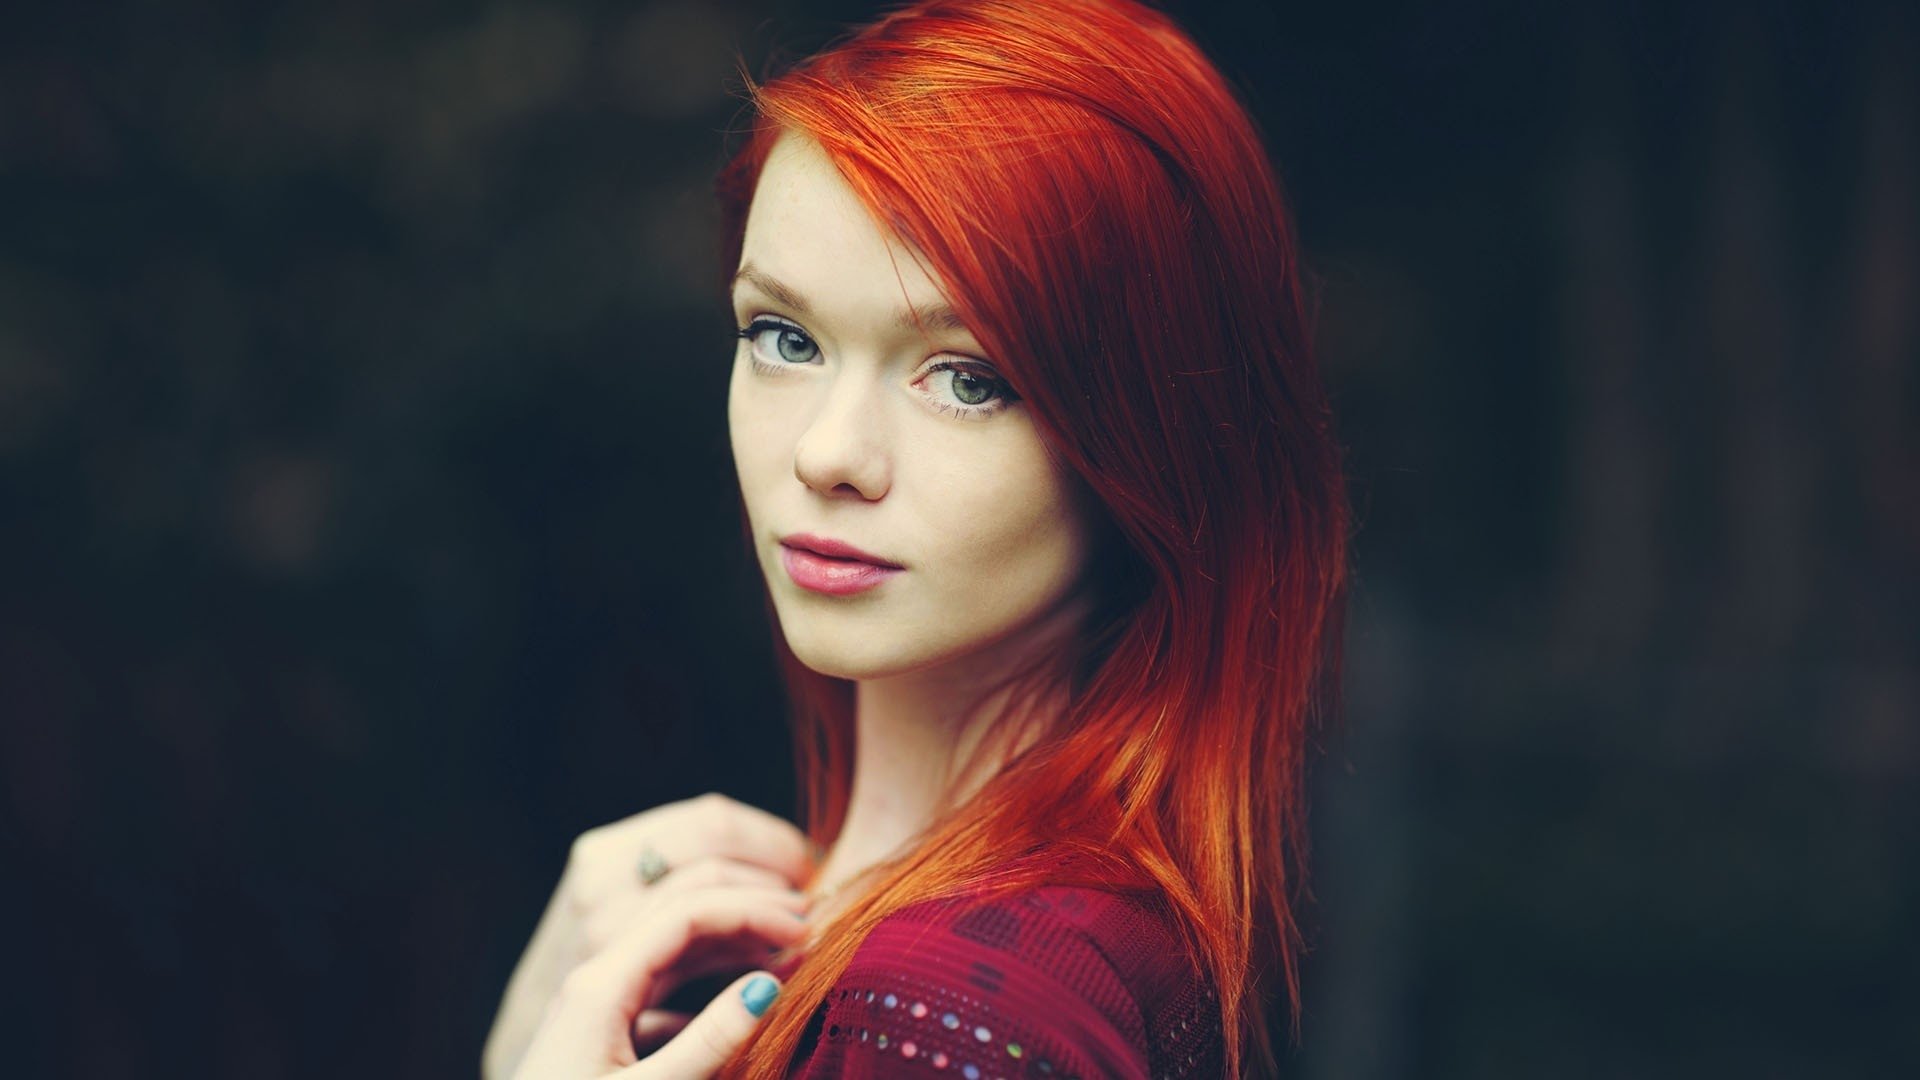 Nice wallpapers Redhead 1920x1080px